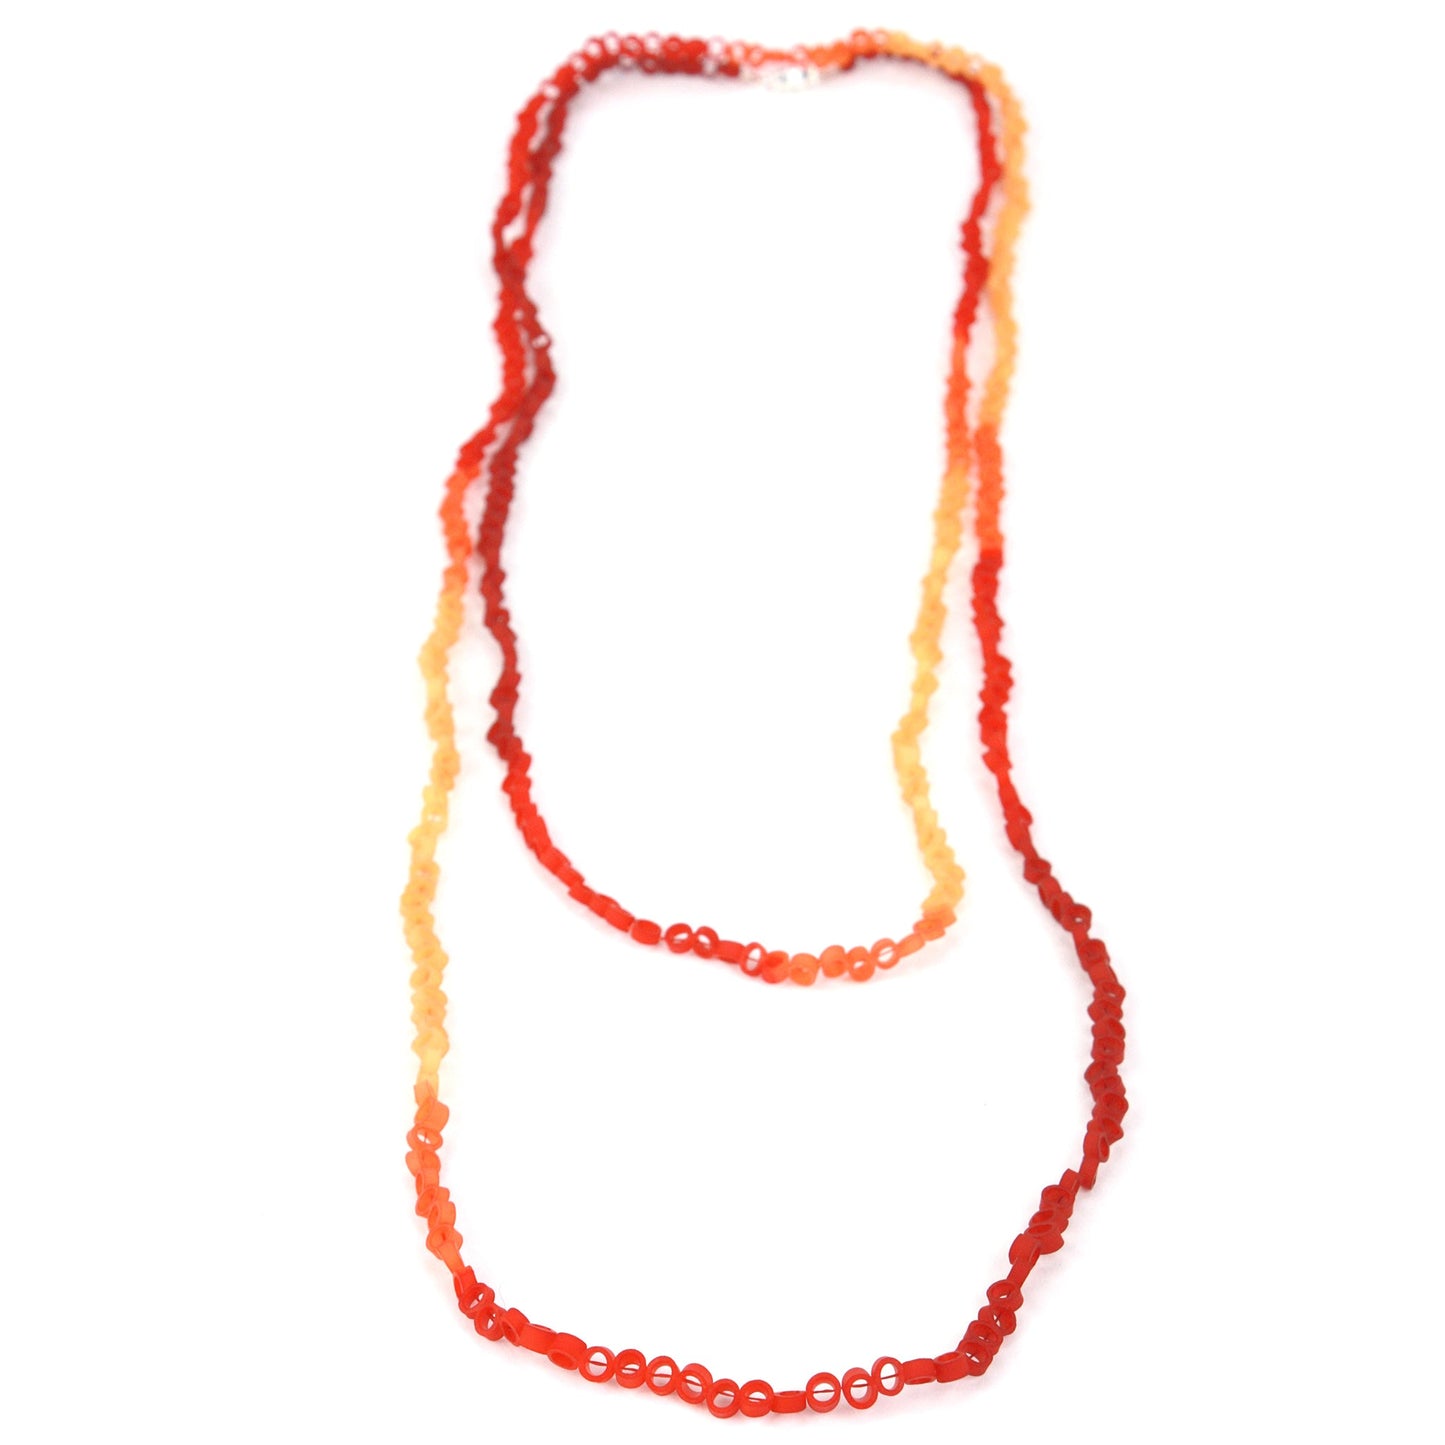 Little links necklace - Red and orange